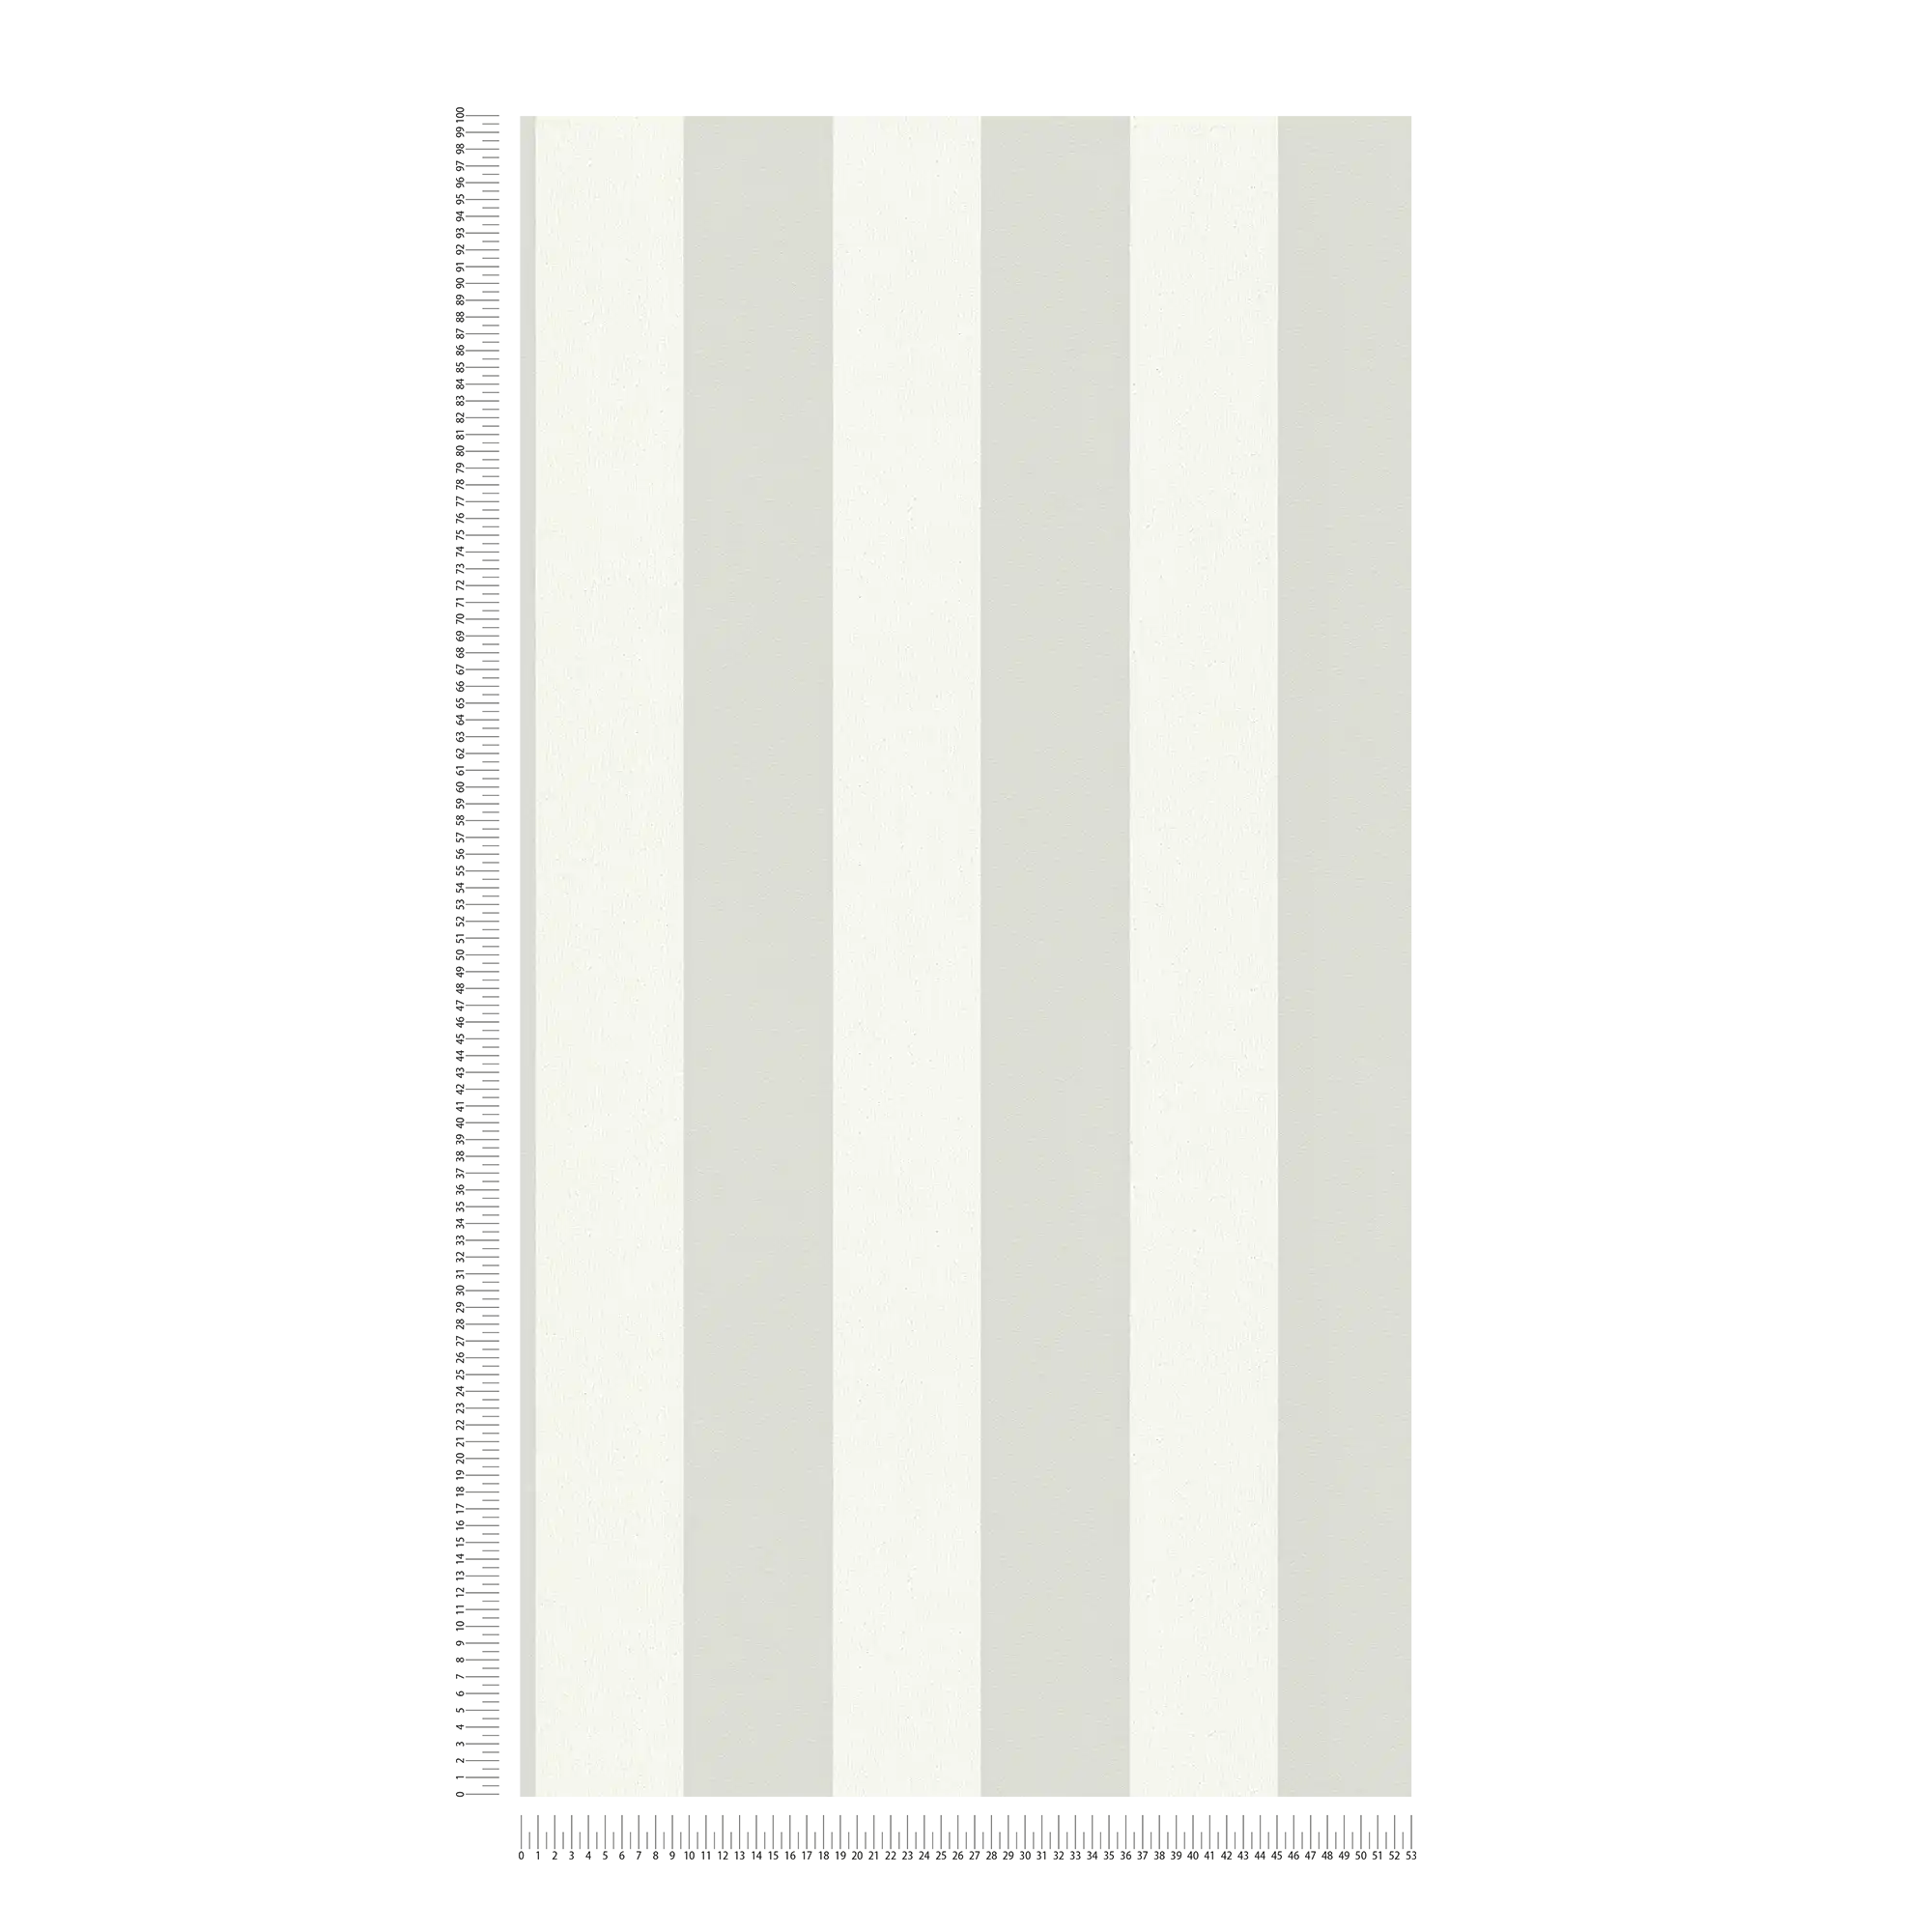             Stripes wallpaper with textured pattern, block stripes grey & white
        